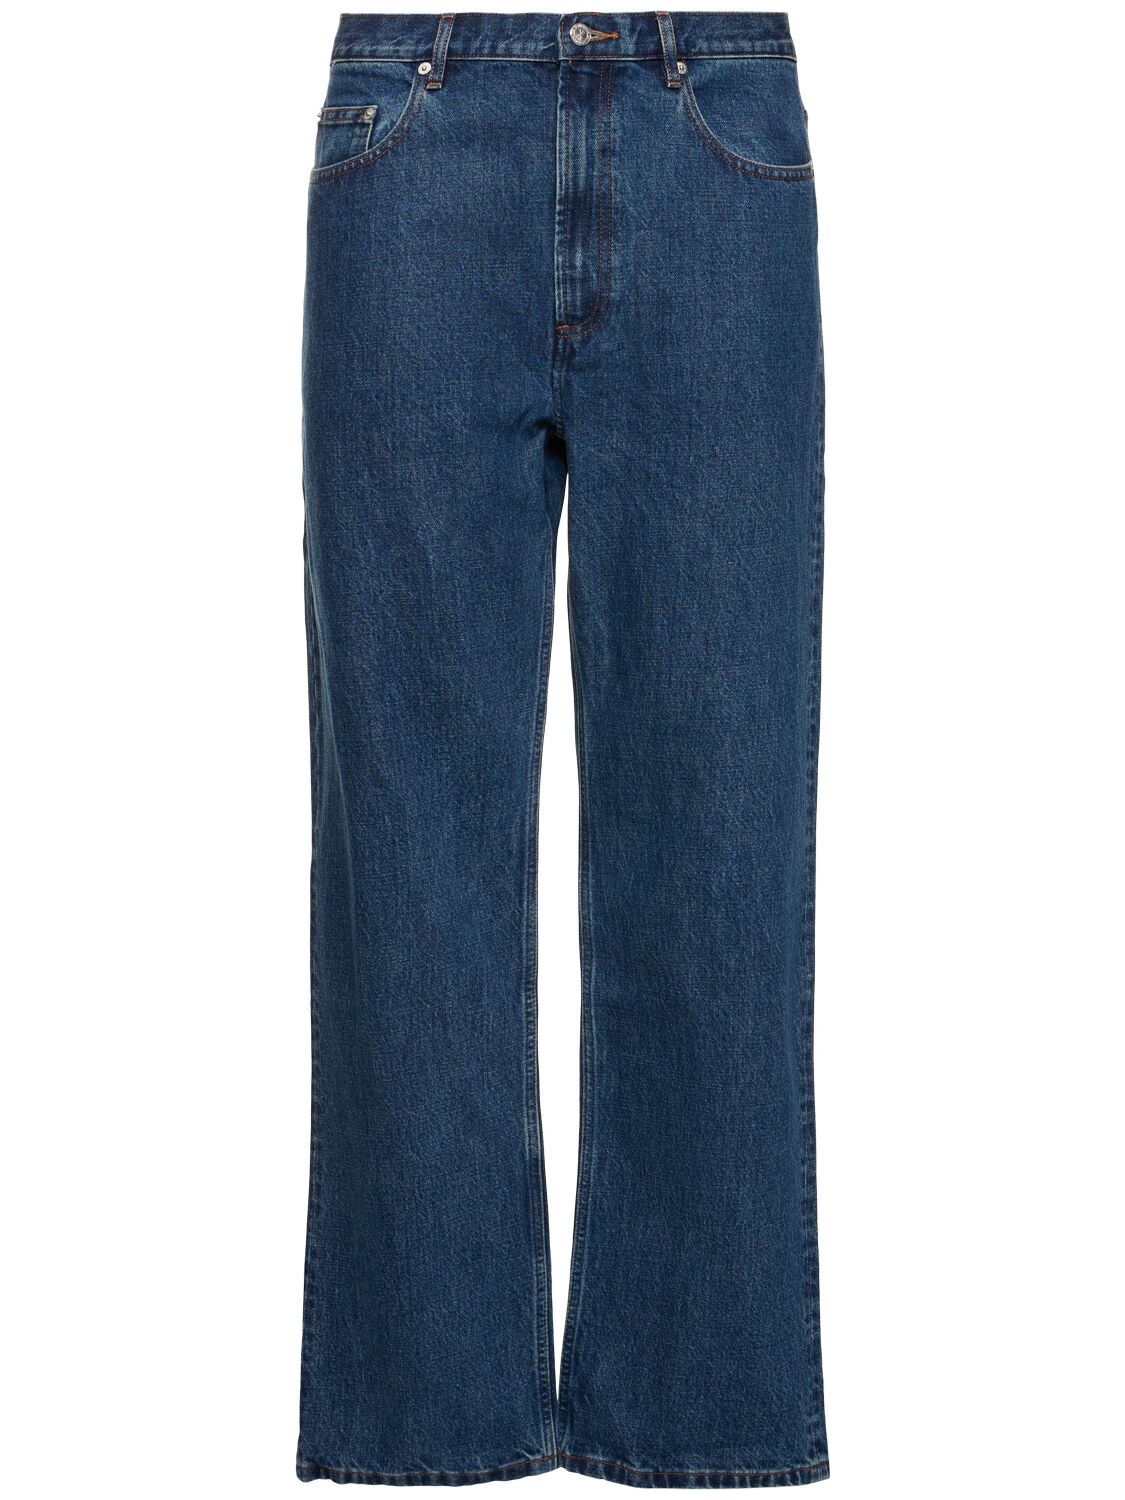 Image of Jean H Relaxed Cotton Denim Jeans